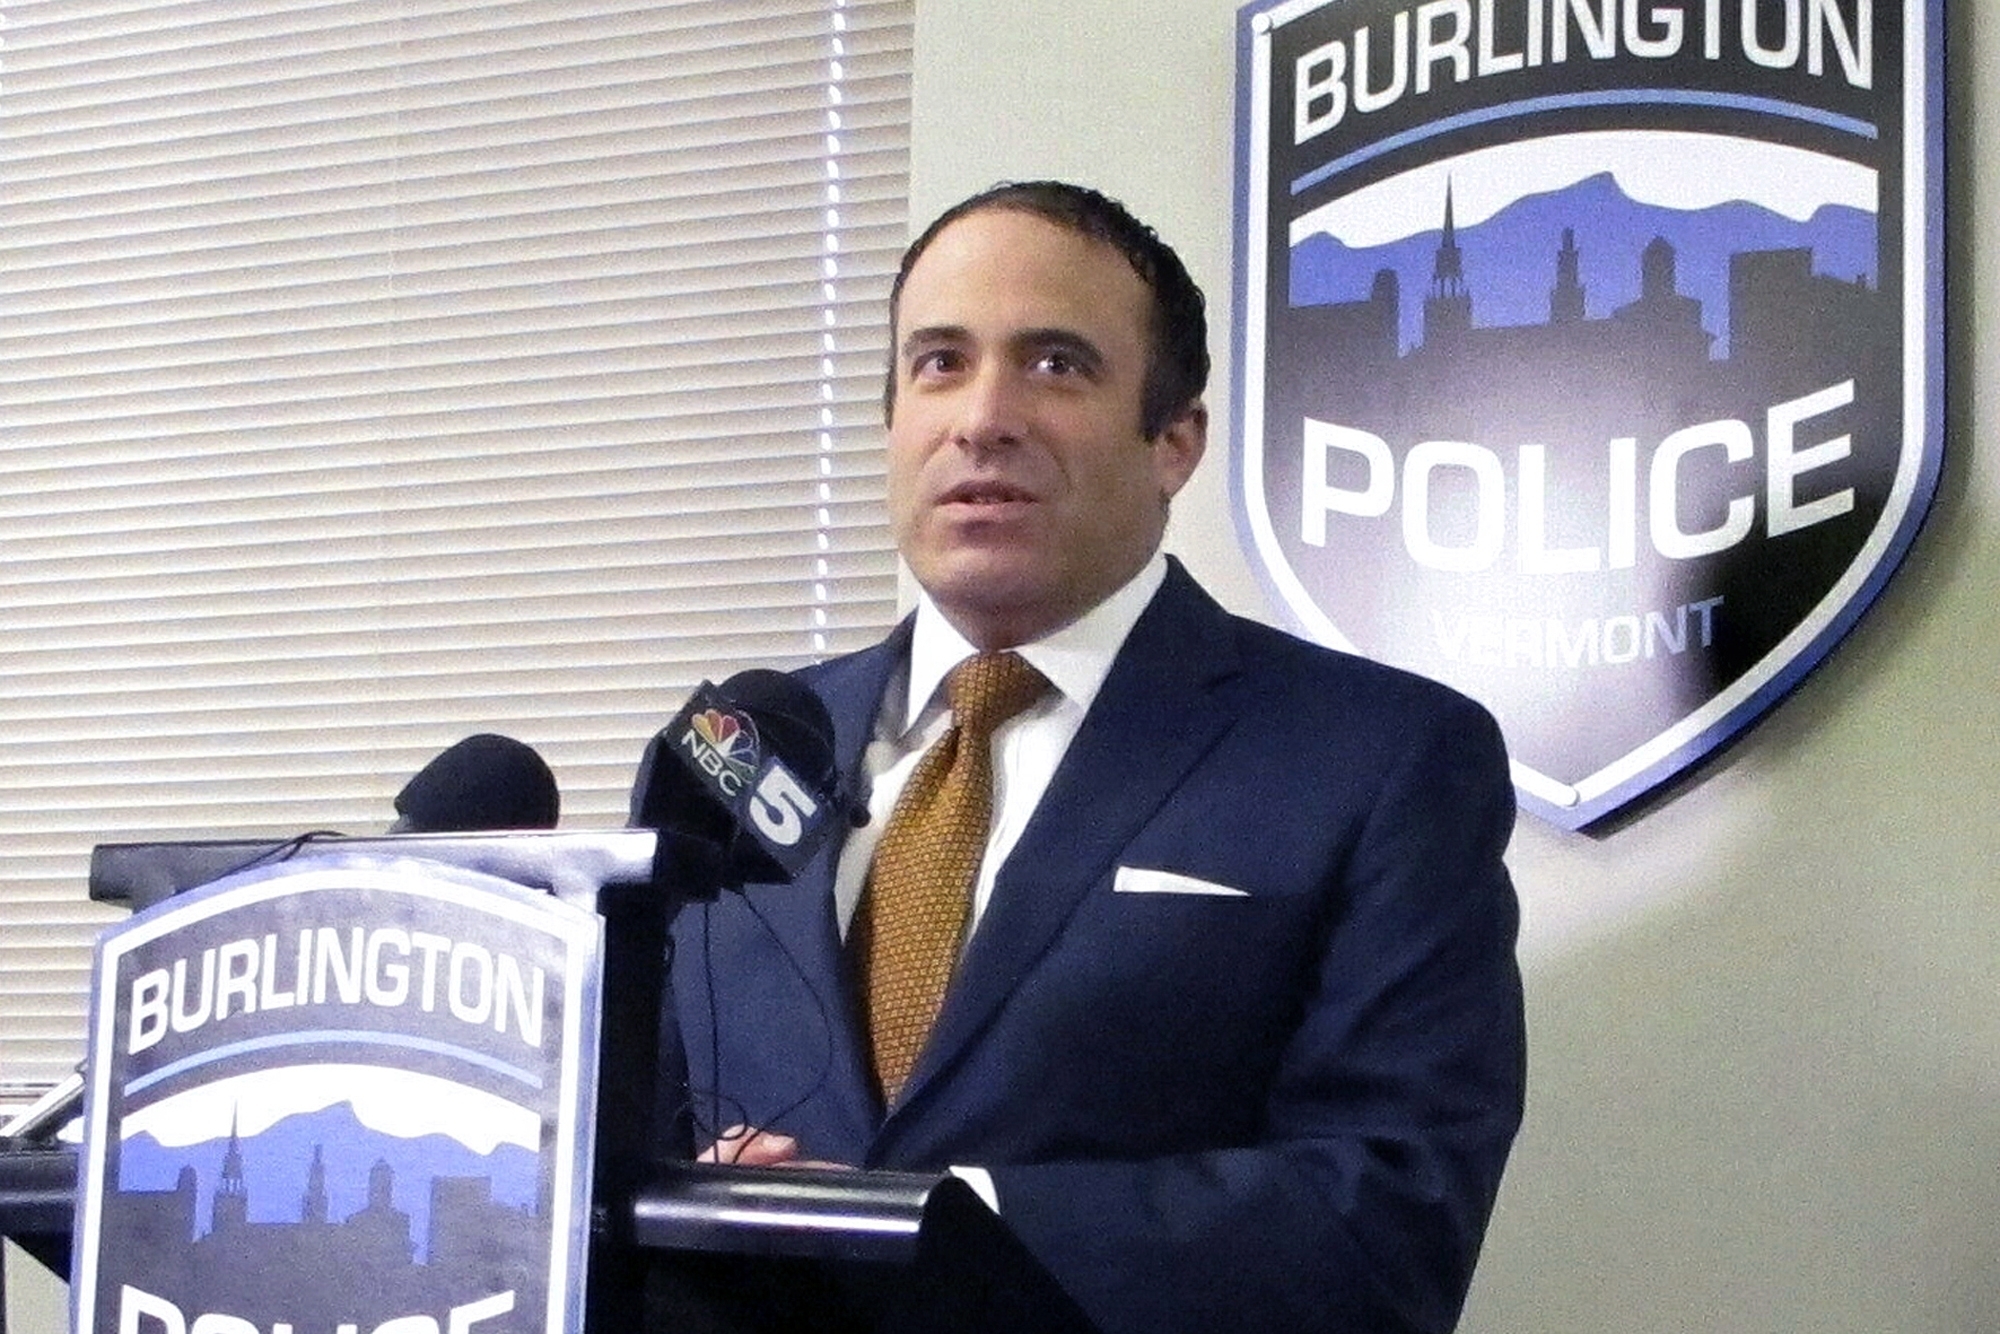 PHOTO: In this April, 10, 2018, file photo, Police Chief Brandon del Pozo speaks during a news conference in Burlington, Vt. The chief told The Associated Press that he used an anonymous Twitter account in July to troll a government critic.